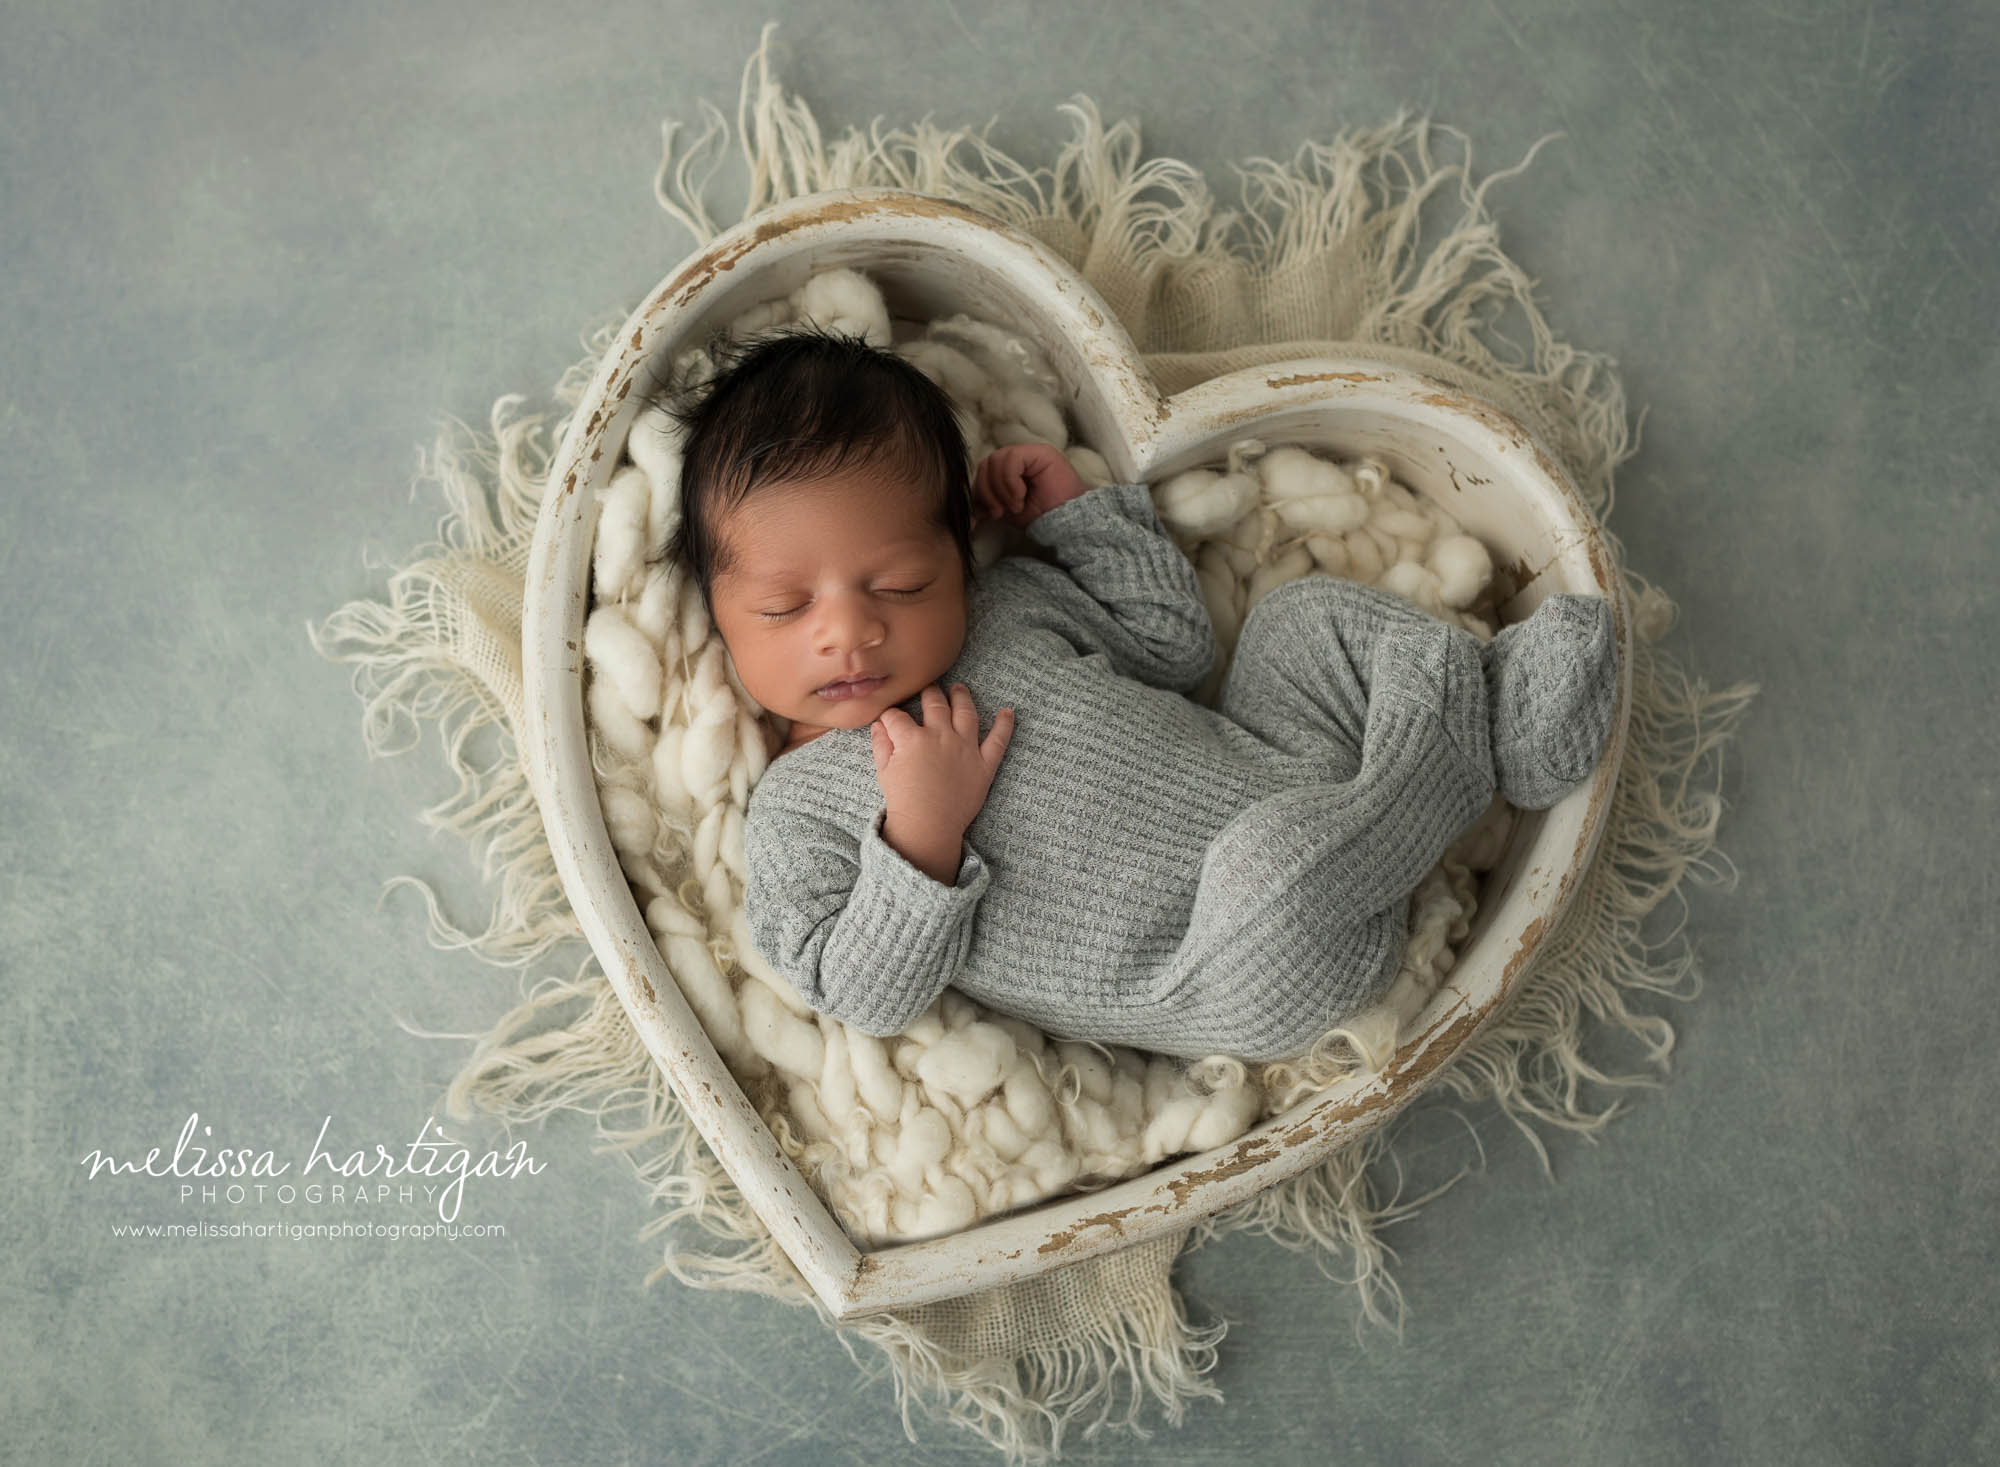 newborn baby boy wearing gray footed baby sleeper posed in cream wooden heart bowl prop